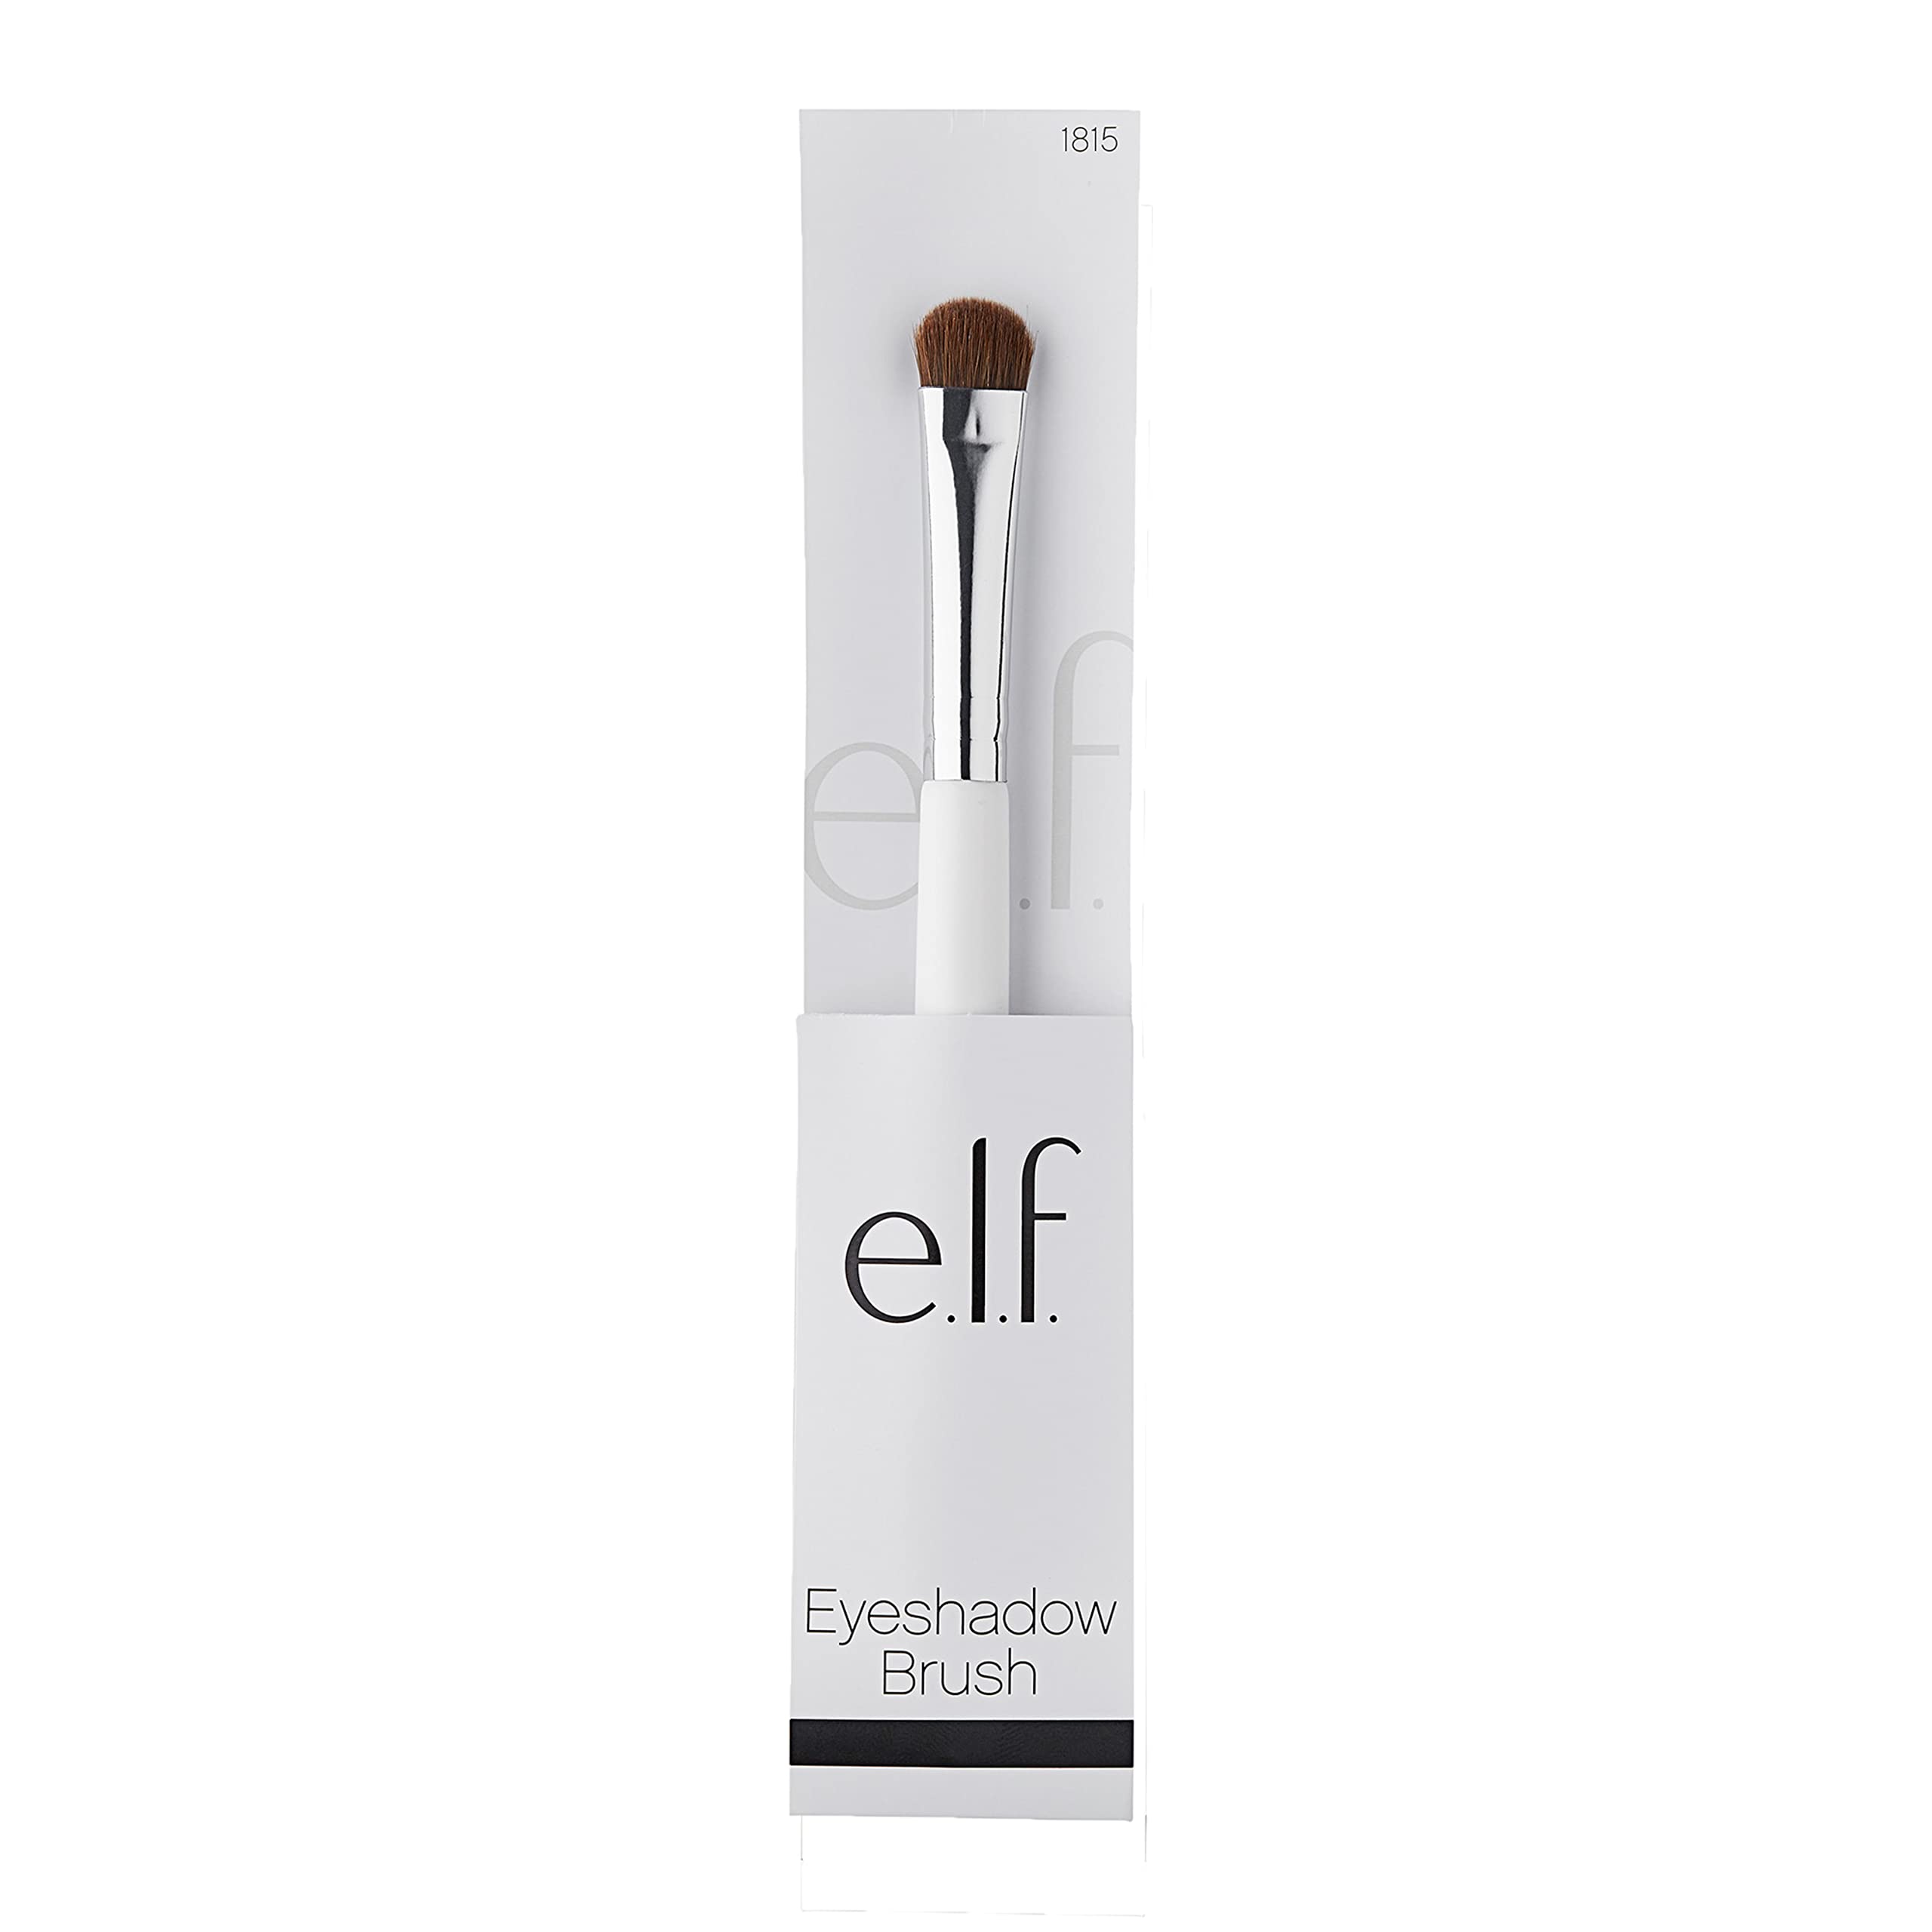 e.l.f. Eyeshadow Brush, Vegan Makeup Tool, For Precision Application and Flawless Blending, Contouring & Defining